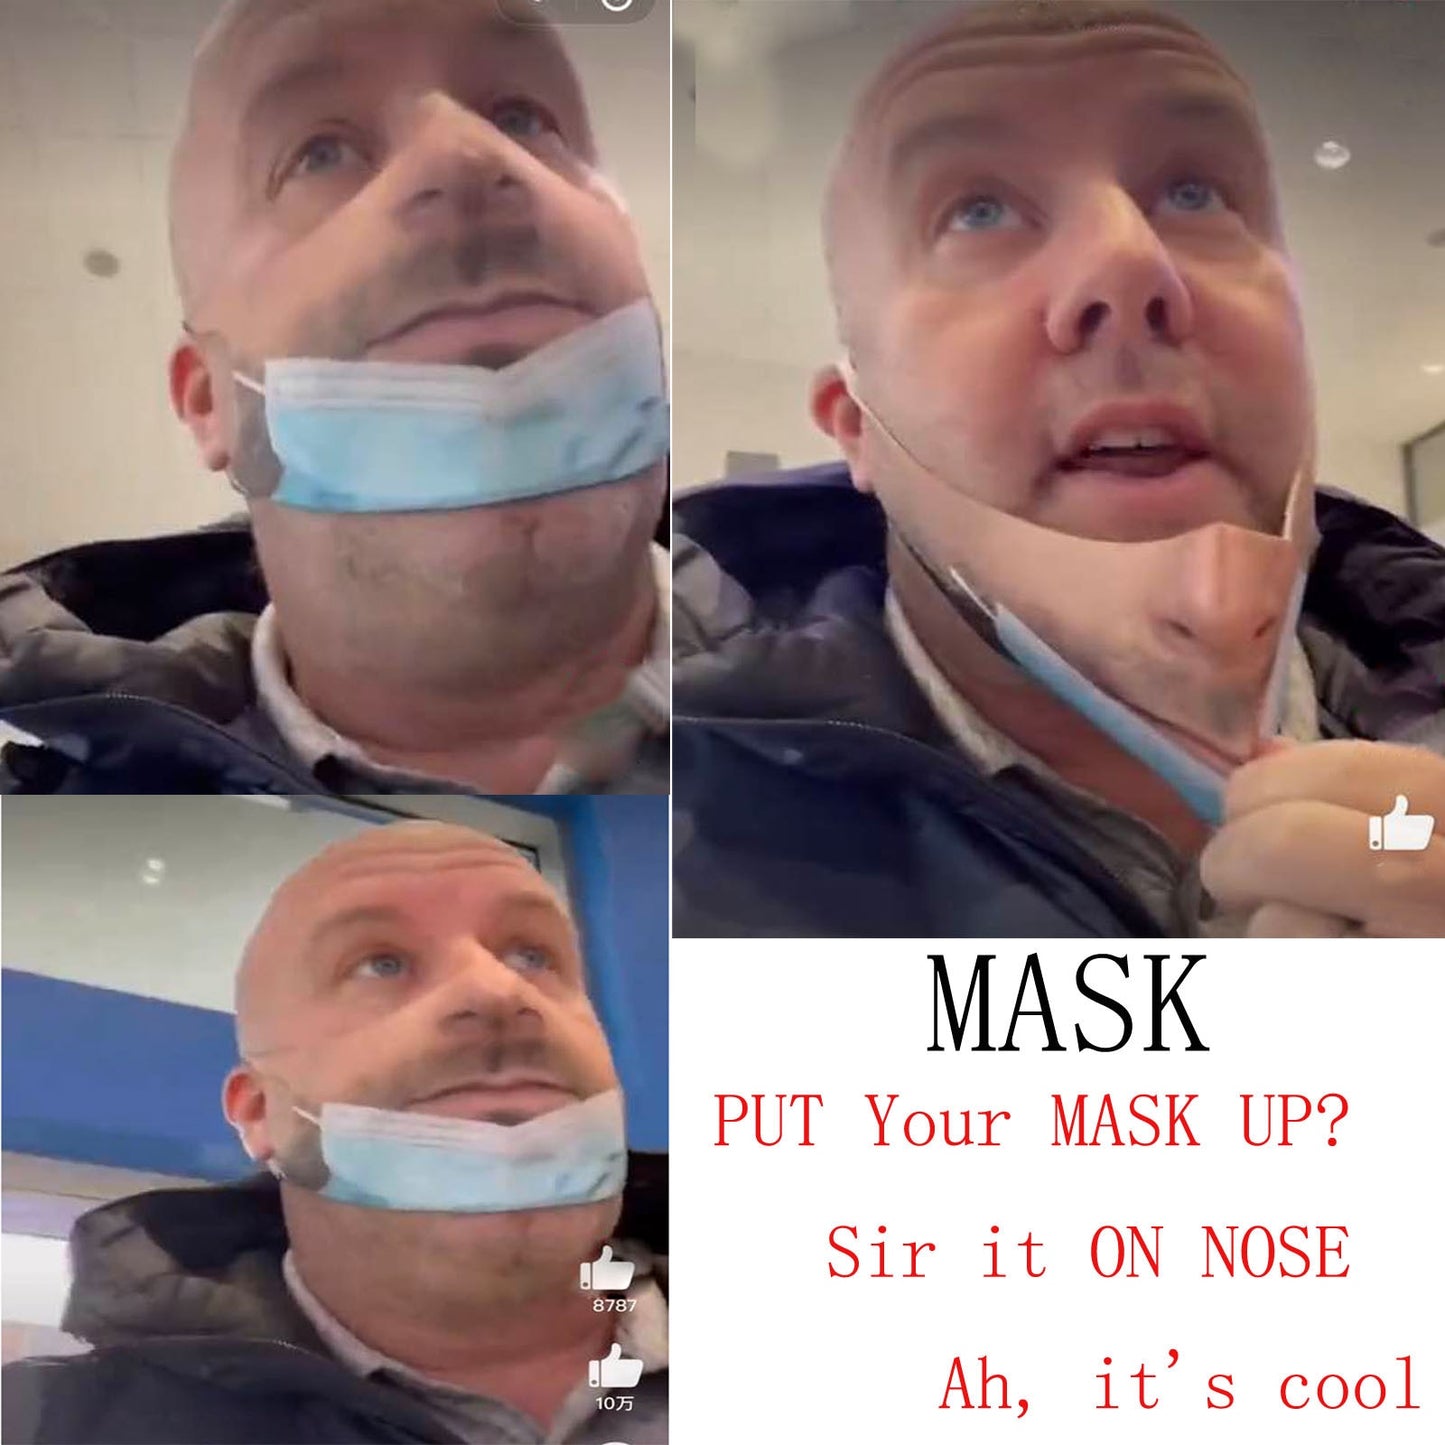 "Pull Your Mask Up" Prank Mask